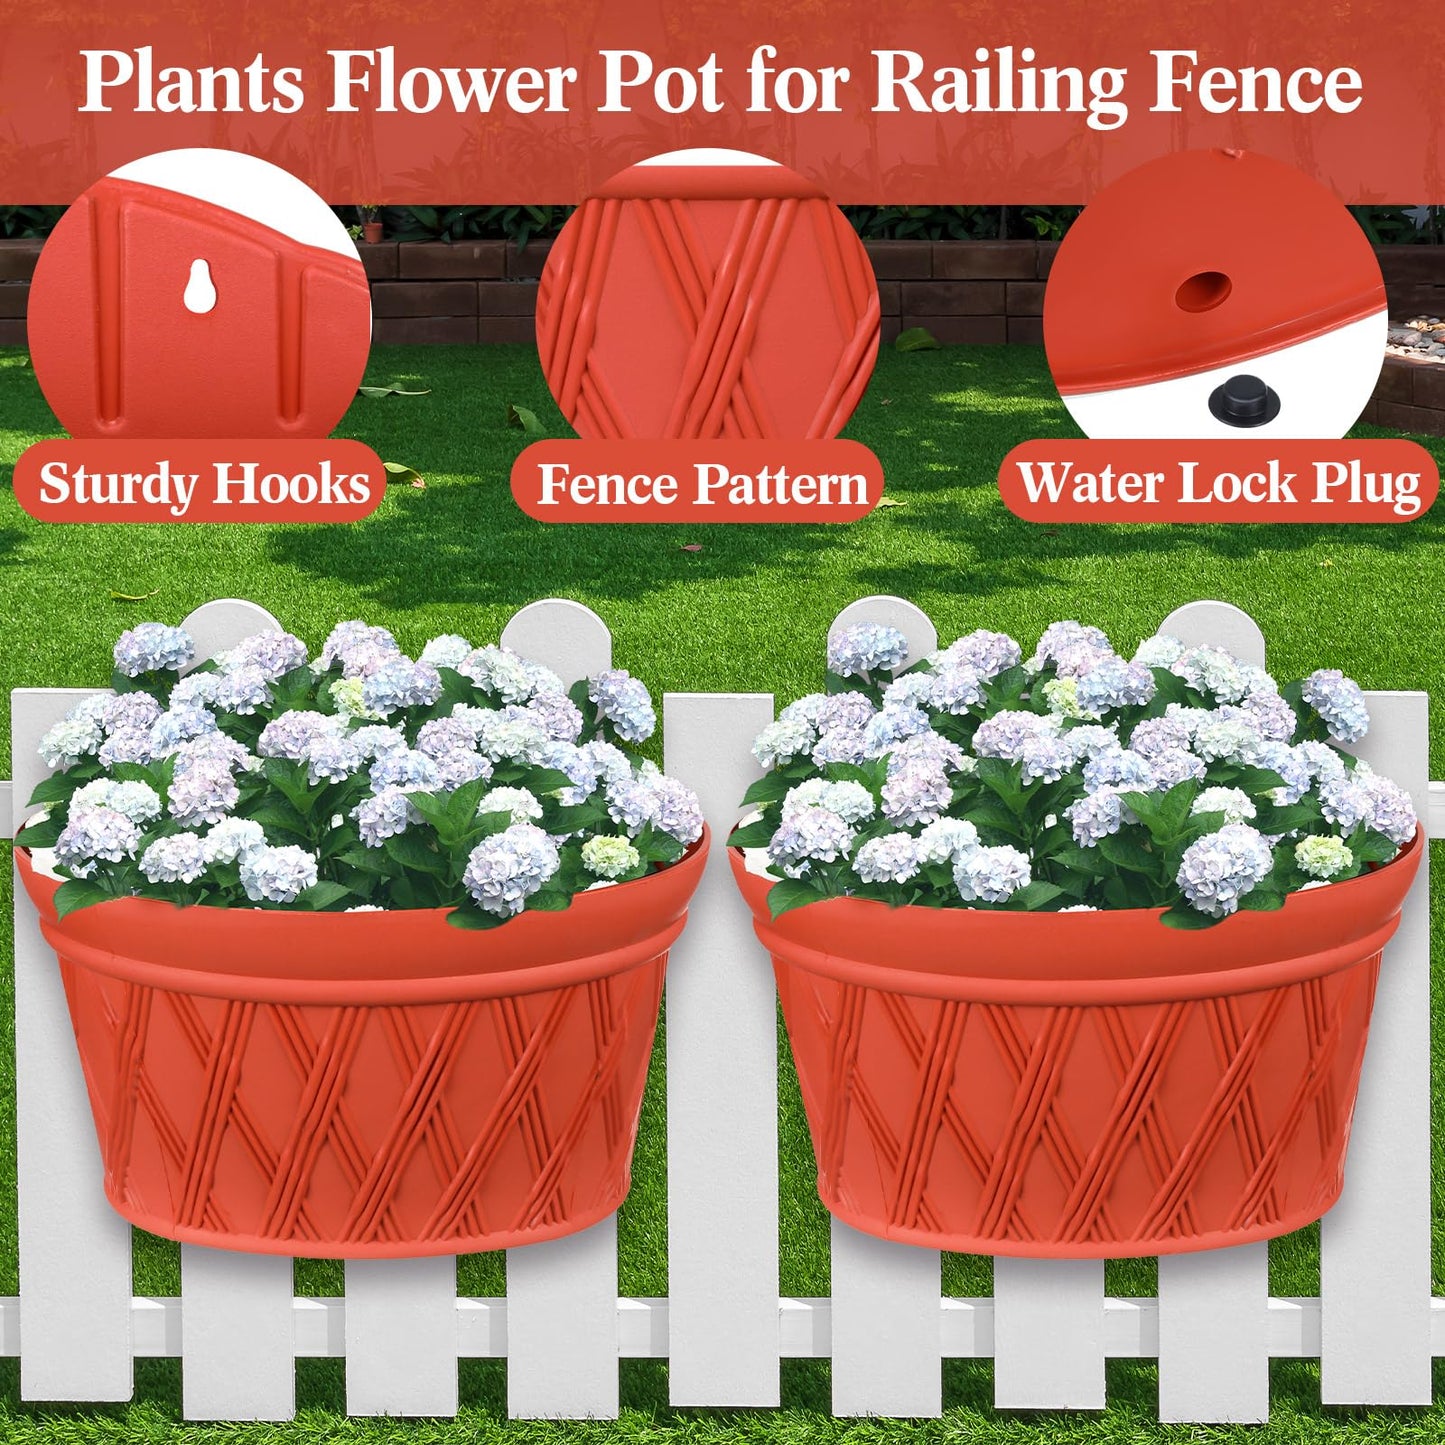 Yungyan 6 Pack Large Wall Hanging Planters 12 Inch Hanging Flower Pot for Railing Fence Plastic Plant Wall Hanging Basket for Indoor Outdoor Railing Balcony Decor Garden Yard (Brick Red)